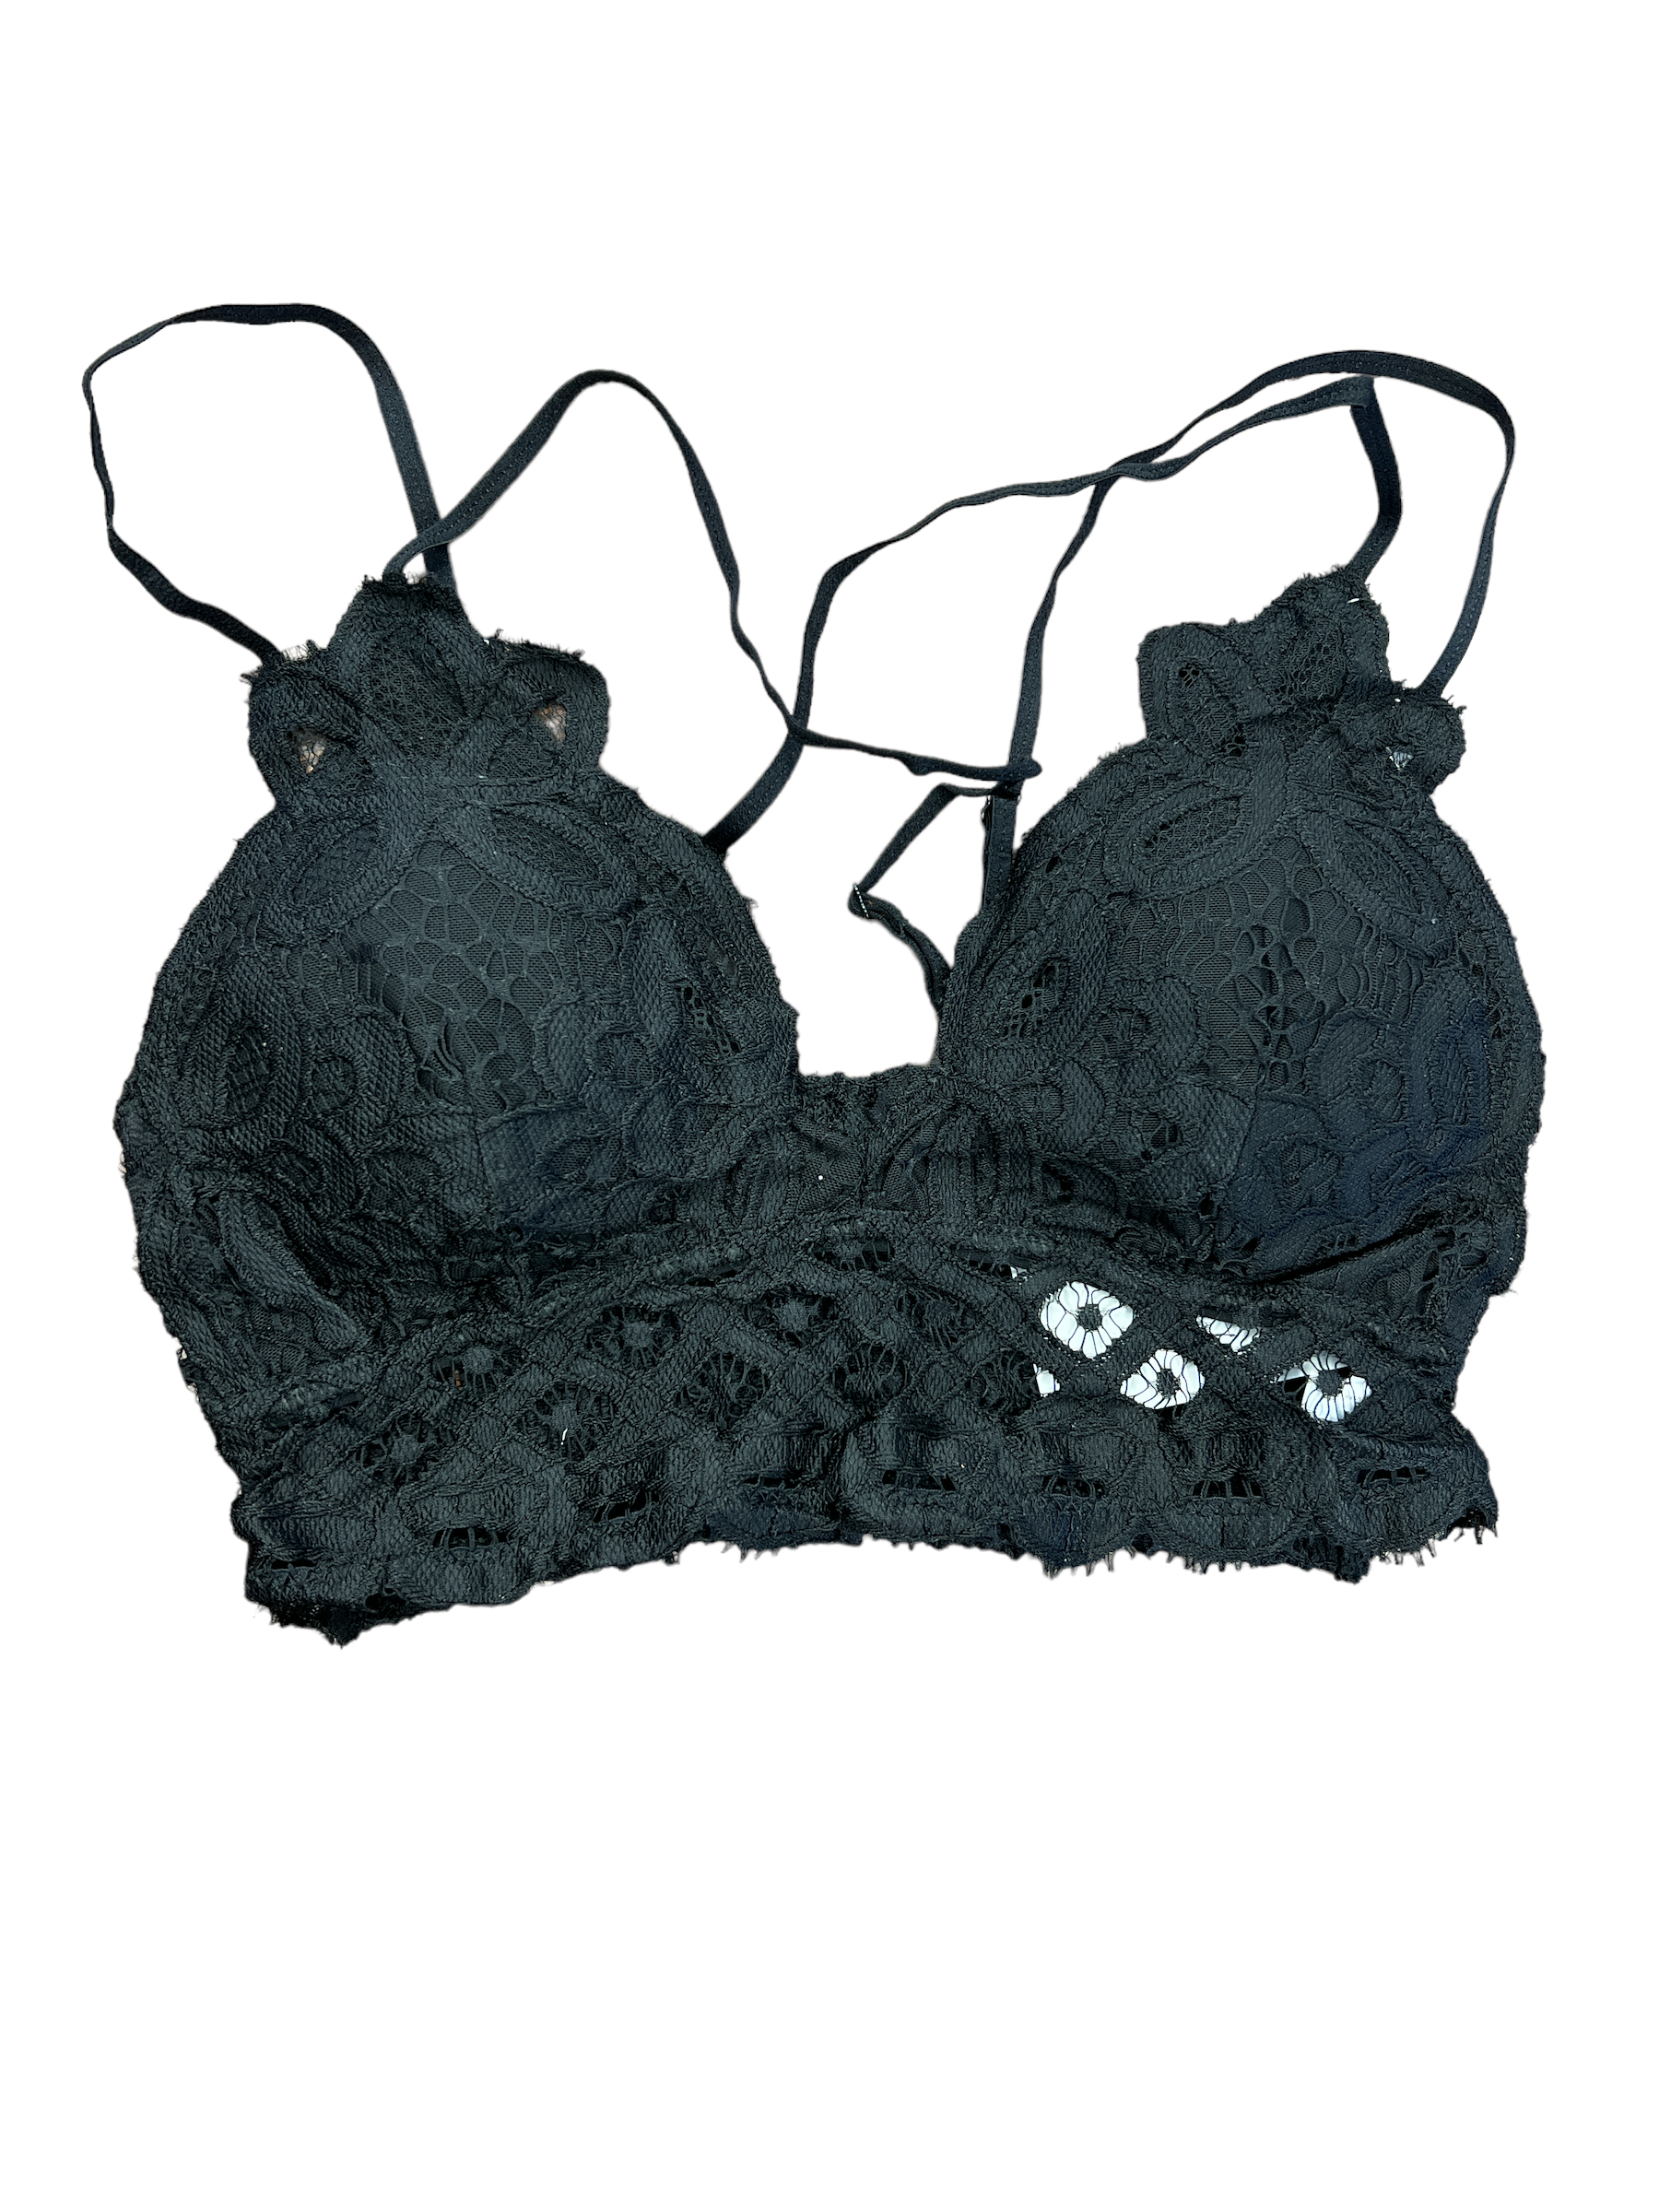 Scalloped Lace Cami Bralette-330 Intimates, Loungewear & PJs-Simply Stylish Boutique-Simply Stylish Boutique | Women’s & Kid’s Fashion | Paducah, KY